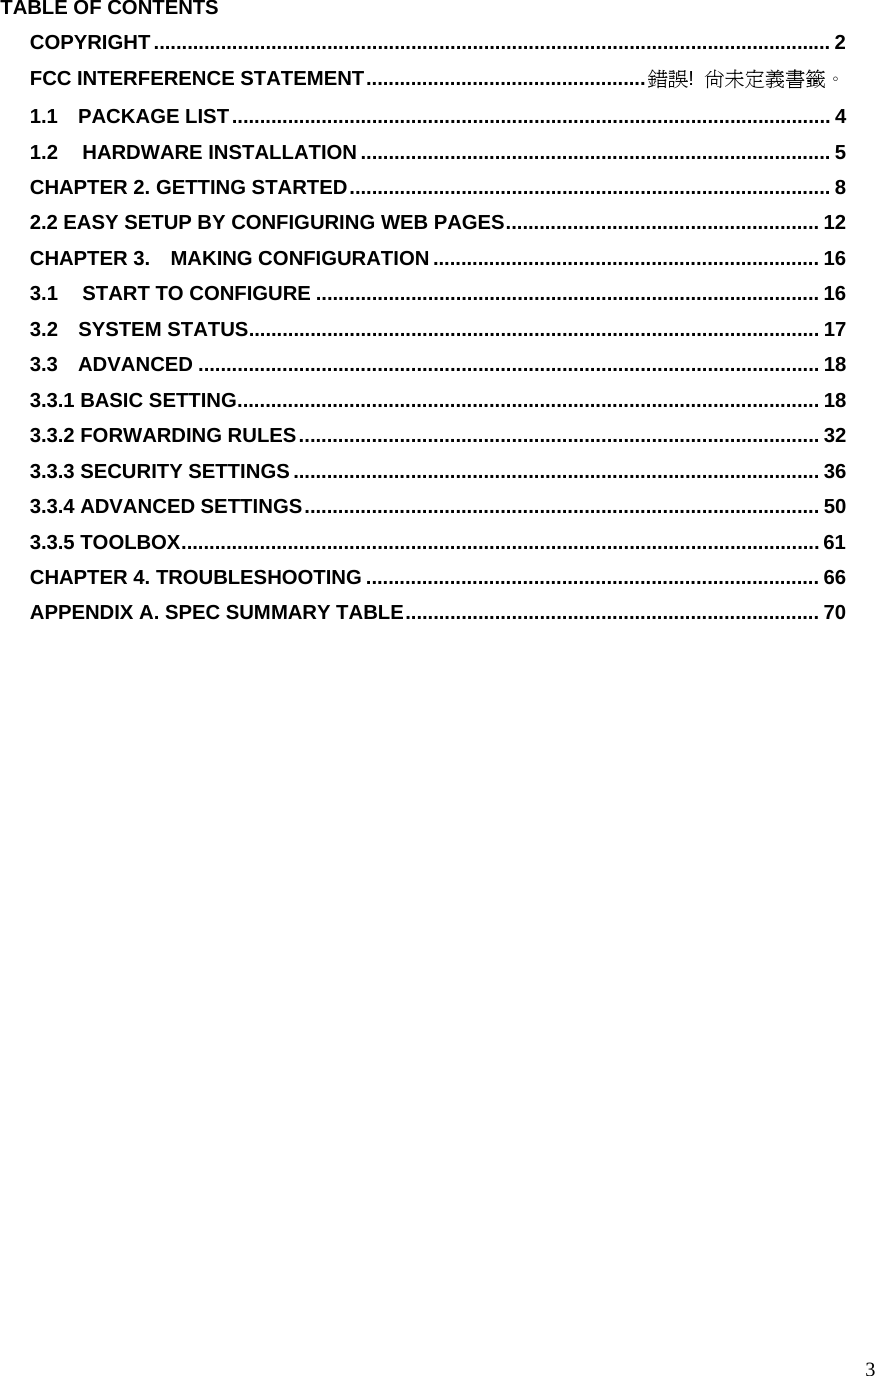  3TABLE OF CONTENTS COPYRIGHT......................................................................................................................... 2 FCC INTERFERENCE STATEMENT..................................................錯誤!  尚未定義書籤。 1.1  PACKAGE LIST........................................................................................................... 4 1.2  HARDWARE INSTALLATION .................................................................................... 5 CHAPTER 2. GETTING STARTED...................................................................................... 8 2.2 EASY SETUP BY CONFIGURING WEB PAGES........................................................ 12 CHAPTER 3.    MAKING CONFIGURATION ..................................................................... 16 3.1  START TO CONFIGURE .......................................................................................... 16 3.2  SYSTEM STATUS...................................................................................................... 17 3.3  ADVANCED ............................................................................................................... 18 3.3.1 BASIC SETTING........................................................................................................ 18 3.3.2 FORWARDING RULES............................................................................................. 32 3.3.3 SECURITY SETTINGS.............................................................................................. 36 3.3.4 ADVANCED SETTINGS............................................................................................ 50 3.3.5 TOOLBOX.................................................................................................................. 61 CHAPTER 4. TROUBLESHOOTING ................................................................................. 66 APPENDIX A. SPEC SUMMARY TABLE.......................................................................... 70  